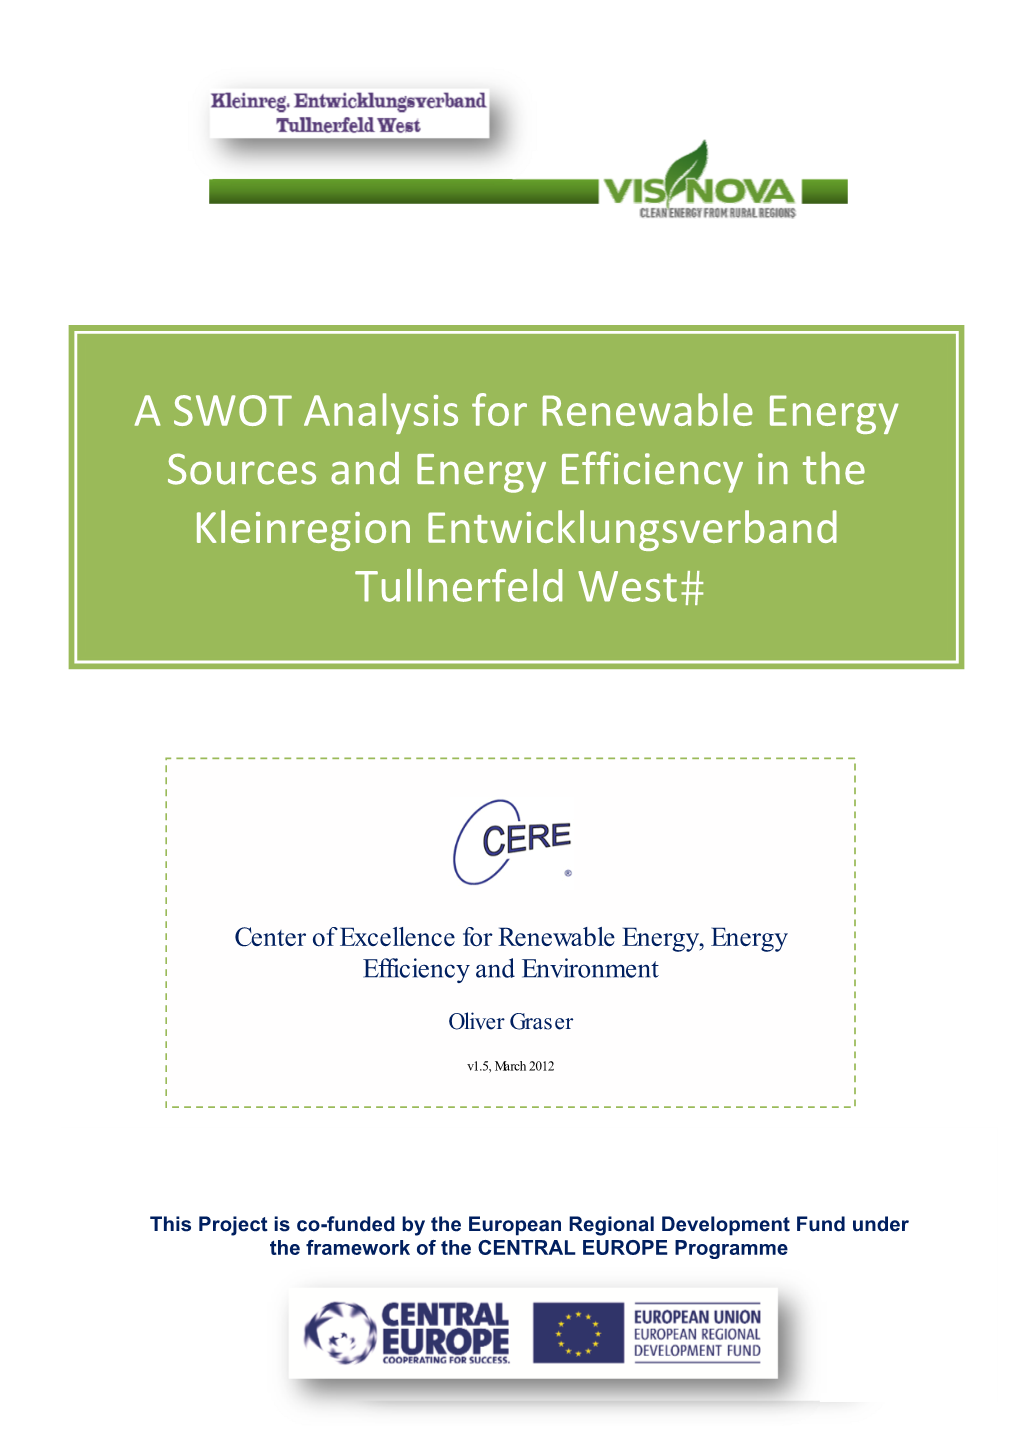 A SWOT Analysis for Renewable Energy Sources and Energy